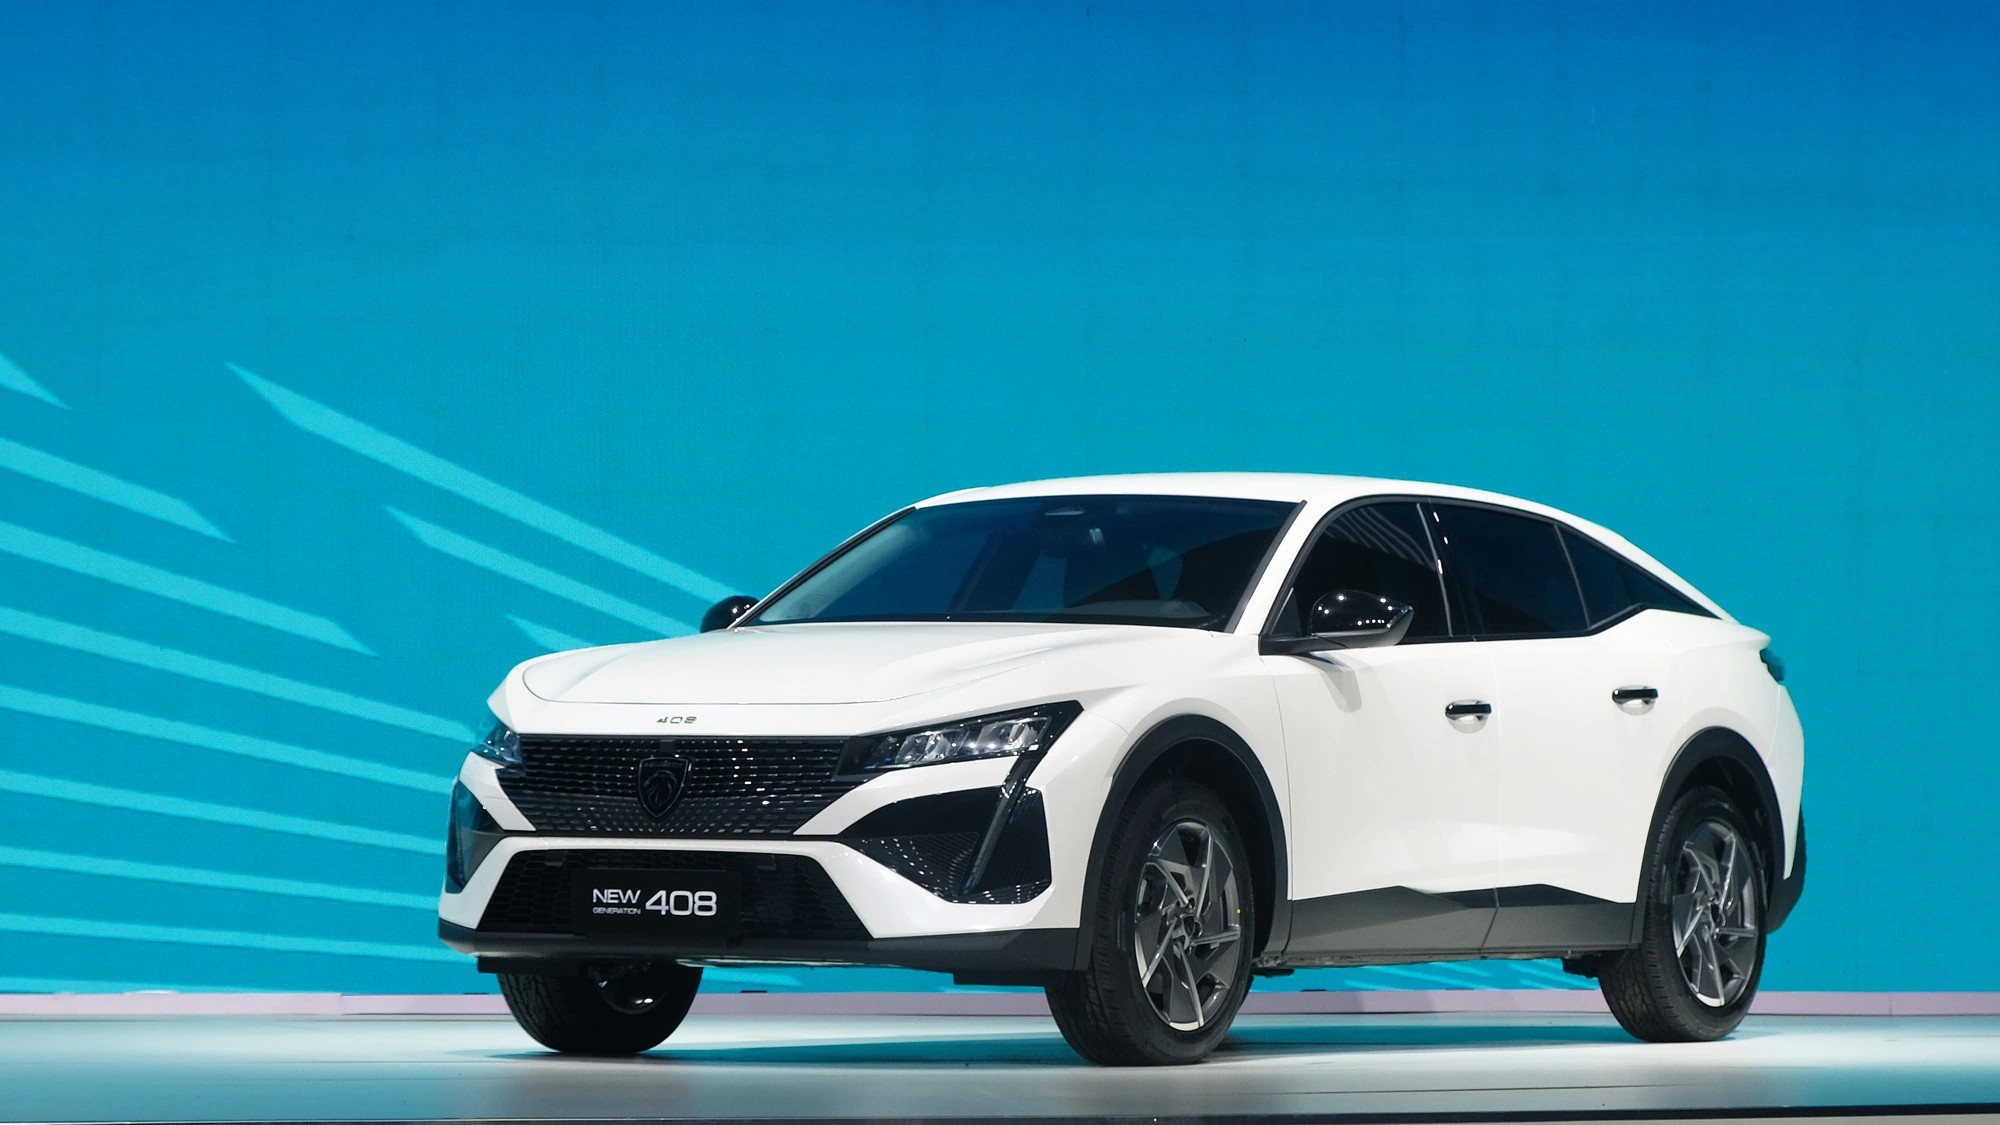 Peugeot 408 mới có thiết kế SUV lai coupe.